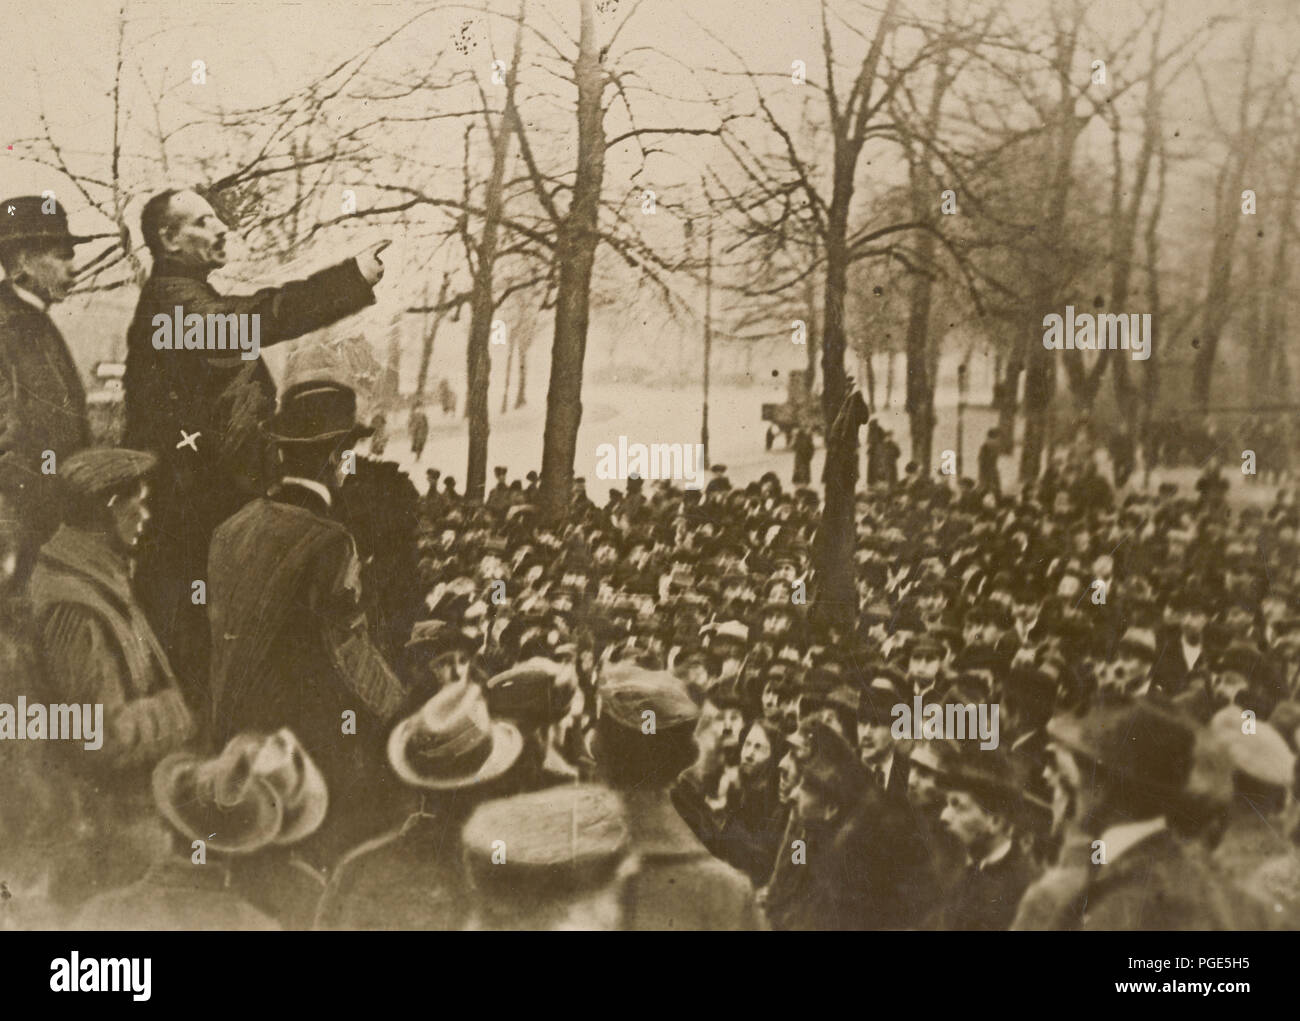 Late spartacide leader addresses released British interns. Dr. Karl Liebknecht, the late Spartacide leader of Germany addressing an audience of British civilian prisoners in the Siegesalle, Berlin. These men previous to the signing of the Armistice were interned in the notorious camp at Ruhleben, near Berlin. The following week Dr. Liebknecht was killed by government troops. Stock Photo